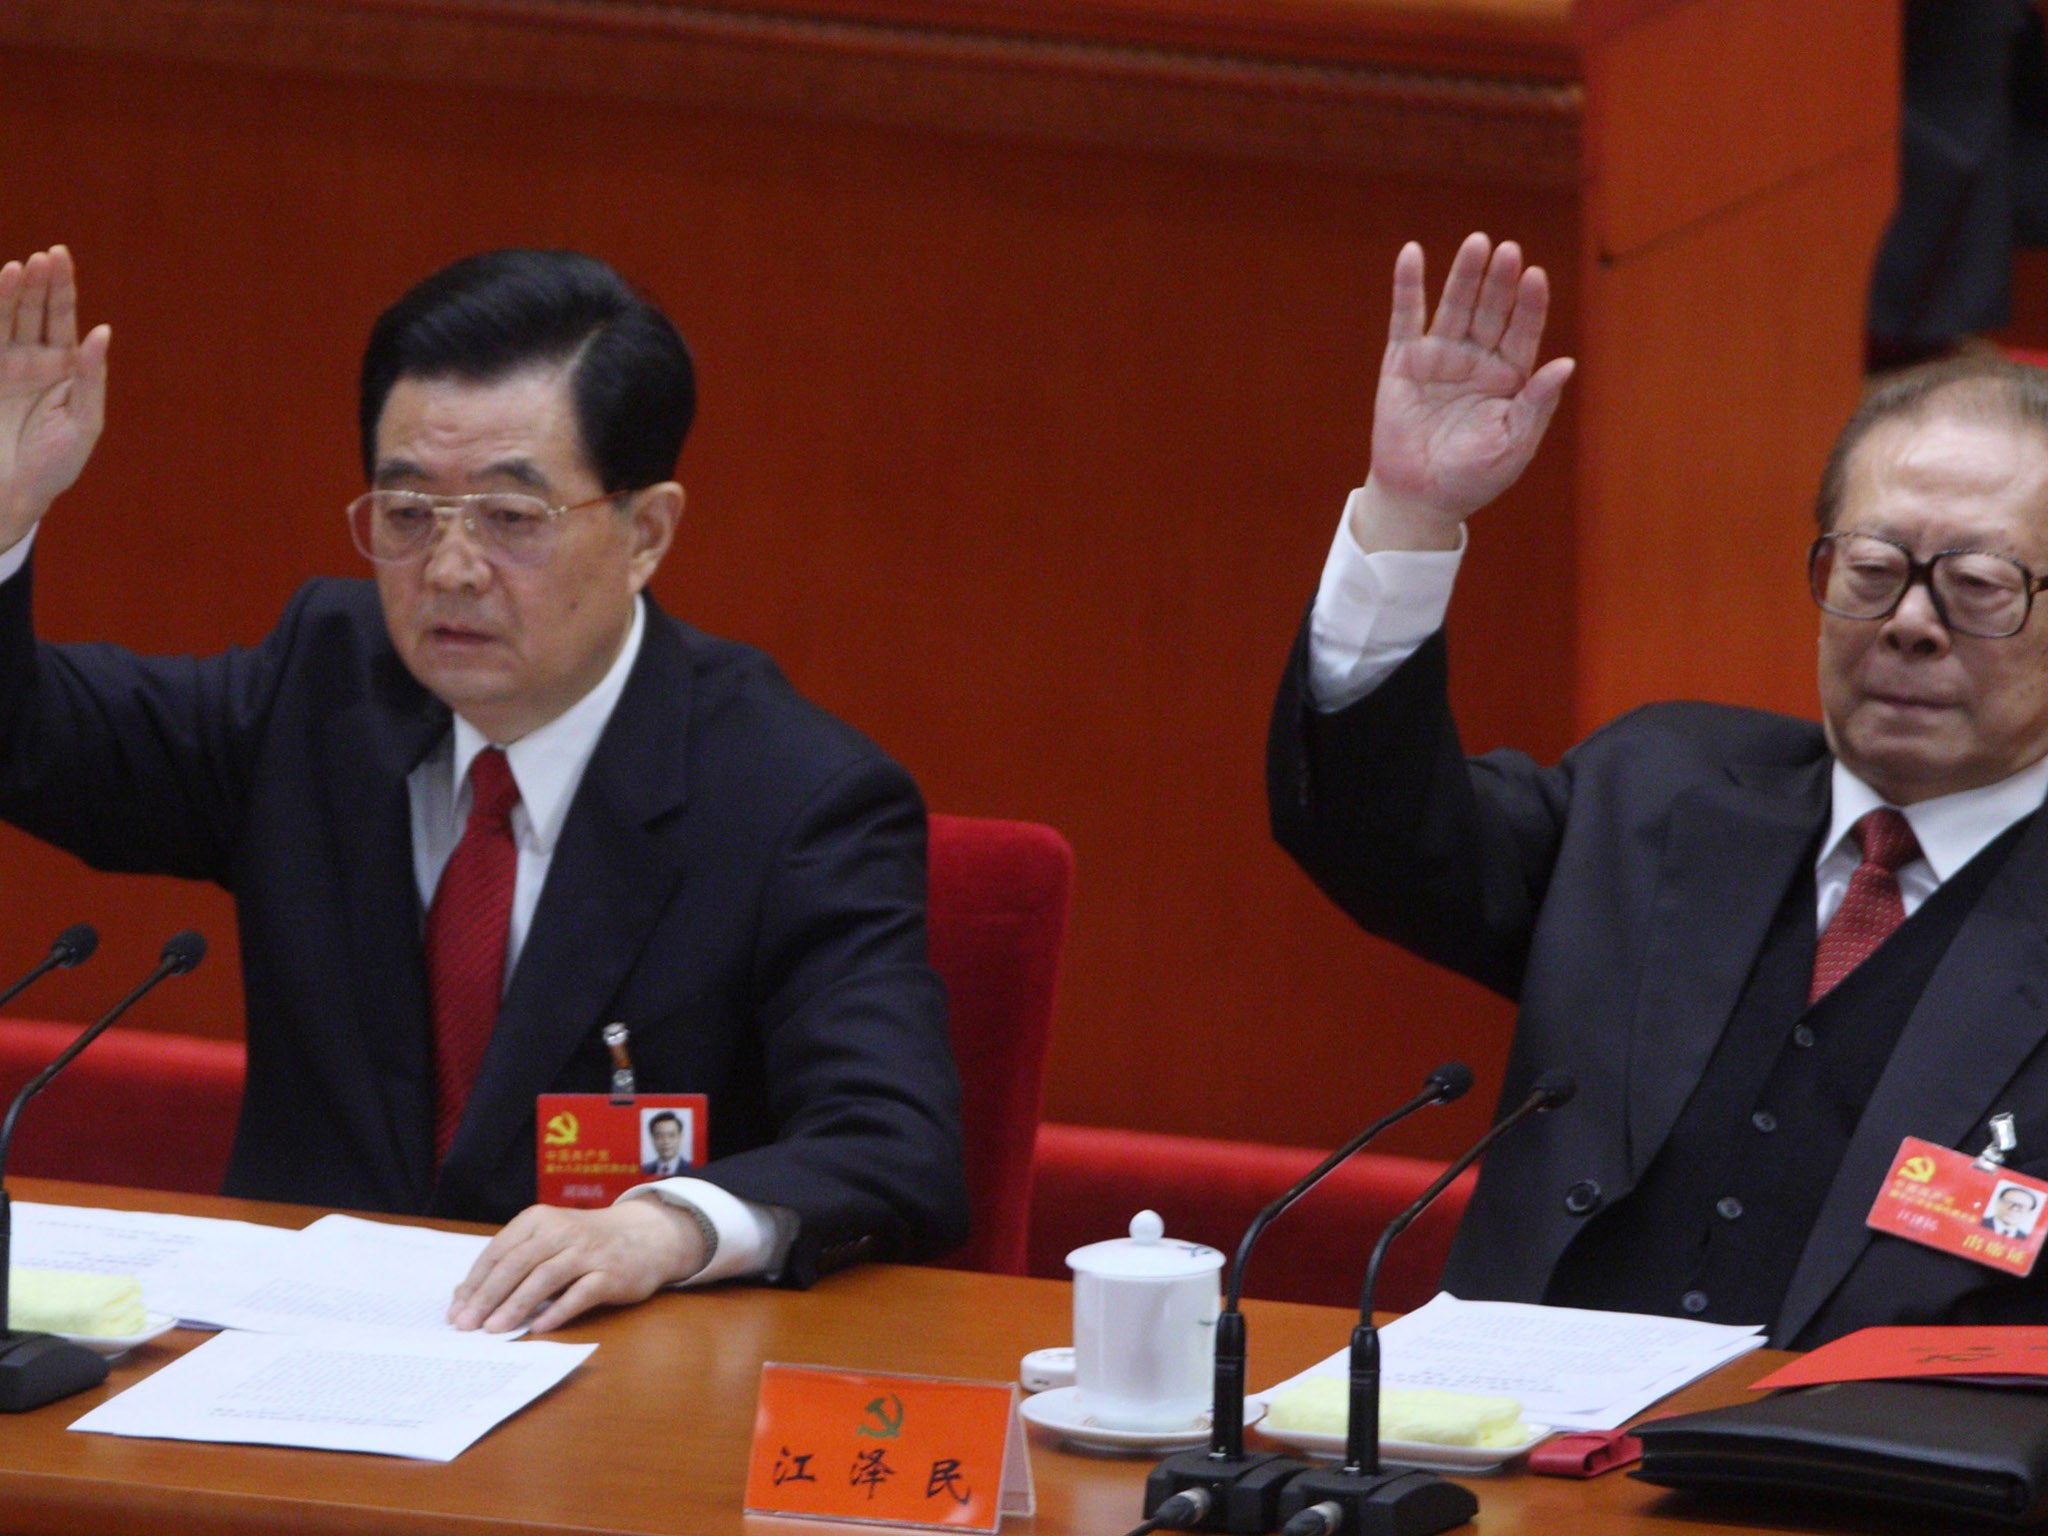 Hu Jintao, China's president, left, and Jiang Zemin, former president, raise their hands during the closing session of the 18th National Congress of the Communist Party of China